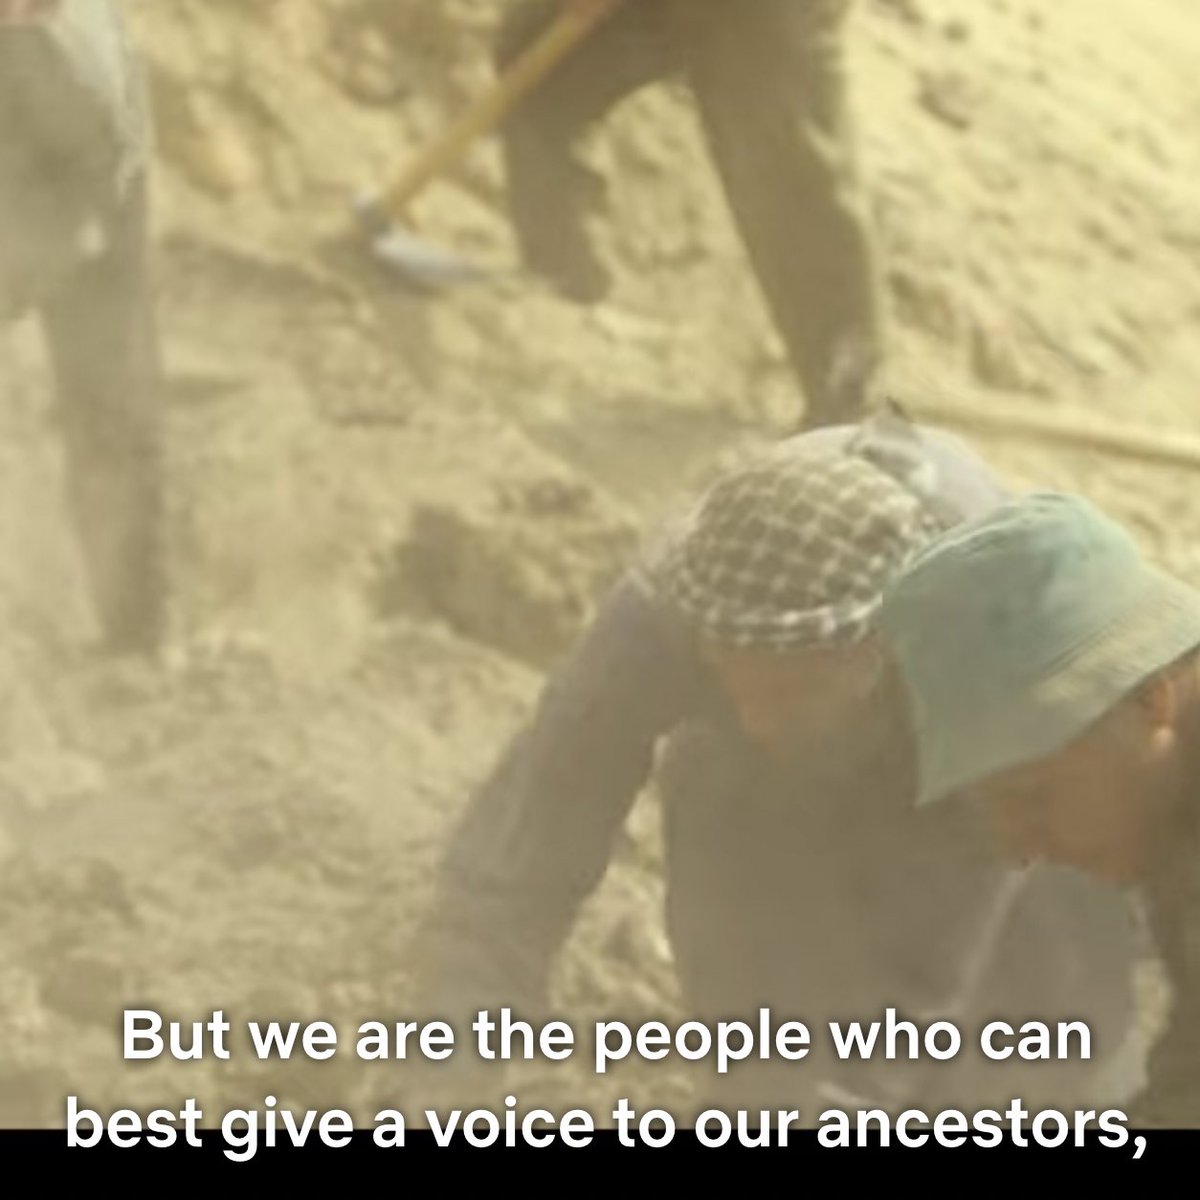 'Secrets of the Saqqara Tomb' on Netflix documents the all-Egyptian archaeological group exploring the history of the Saqqara necropolis.This documentary brought to the fore what it means to decolonise research and archaeology.